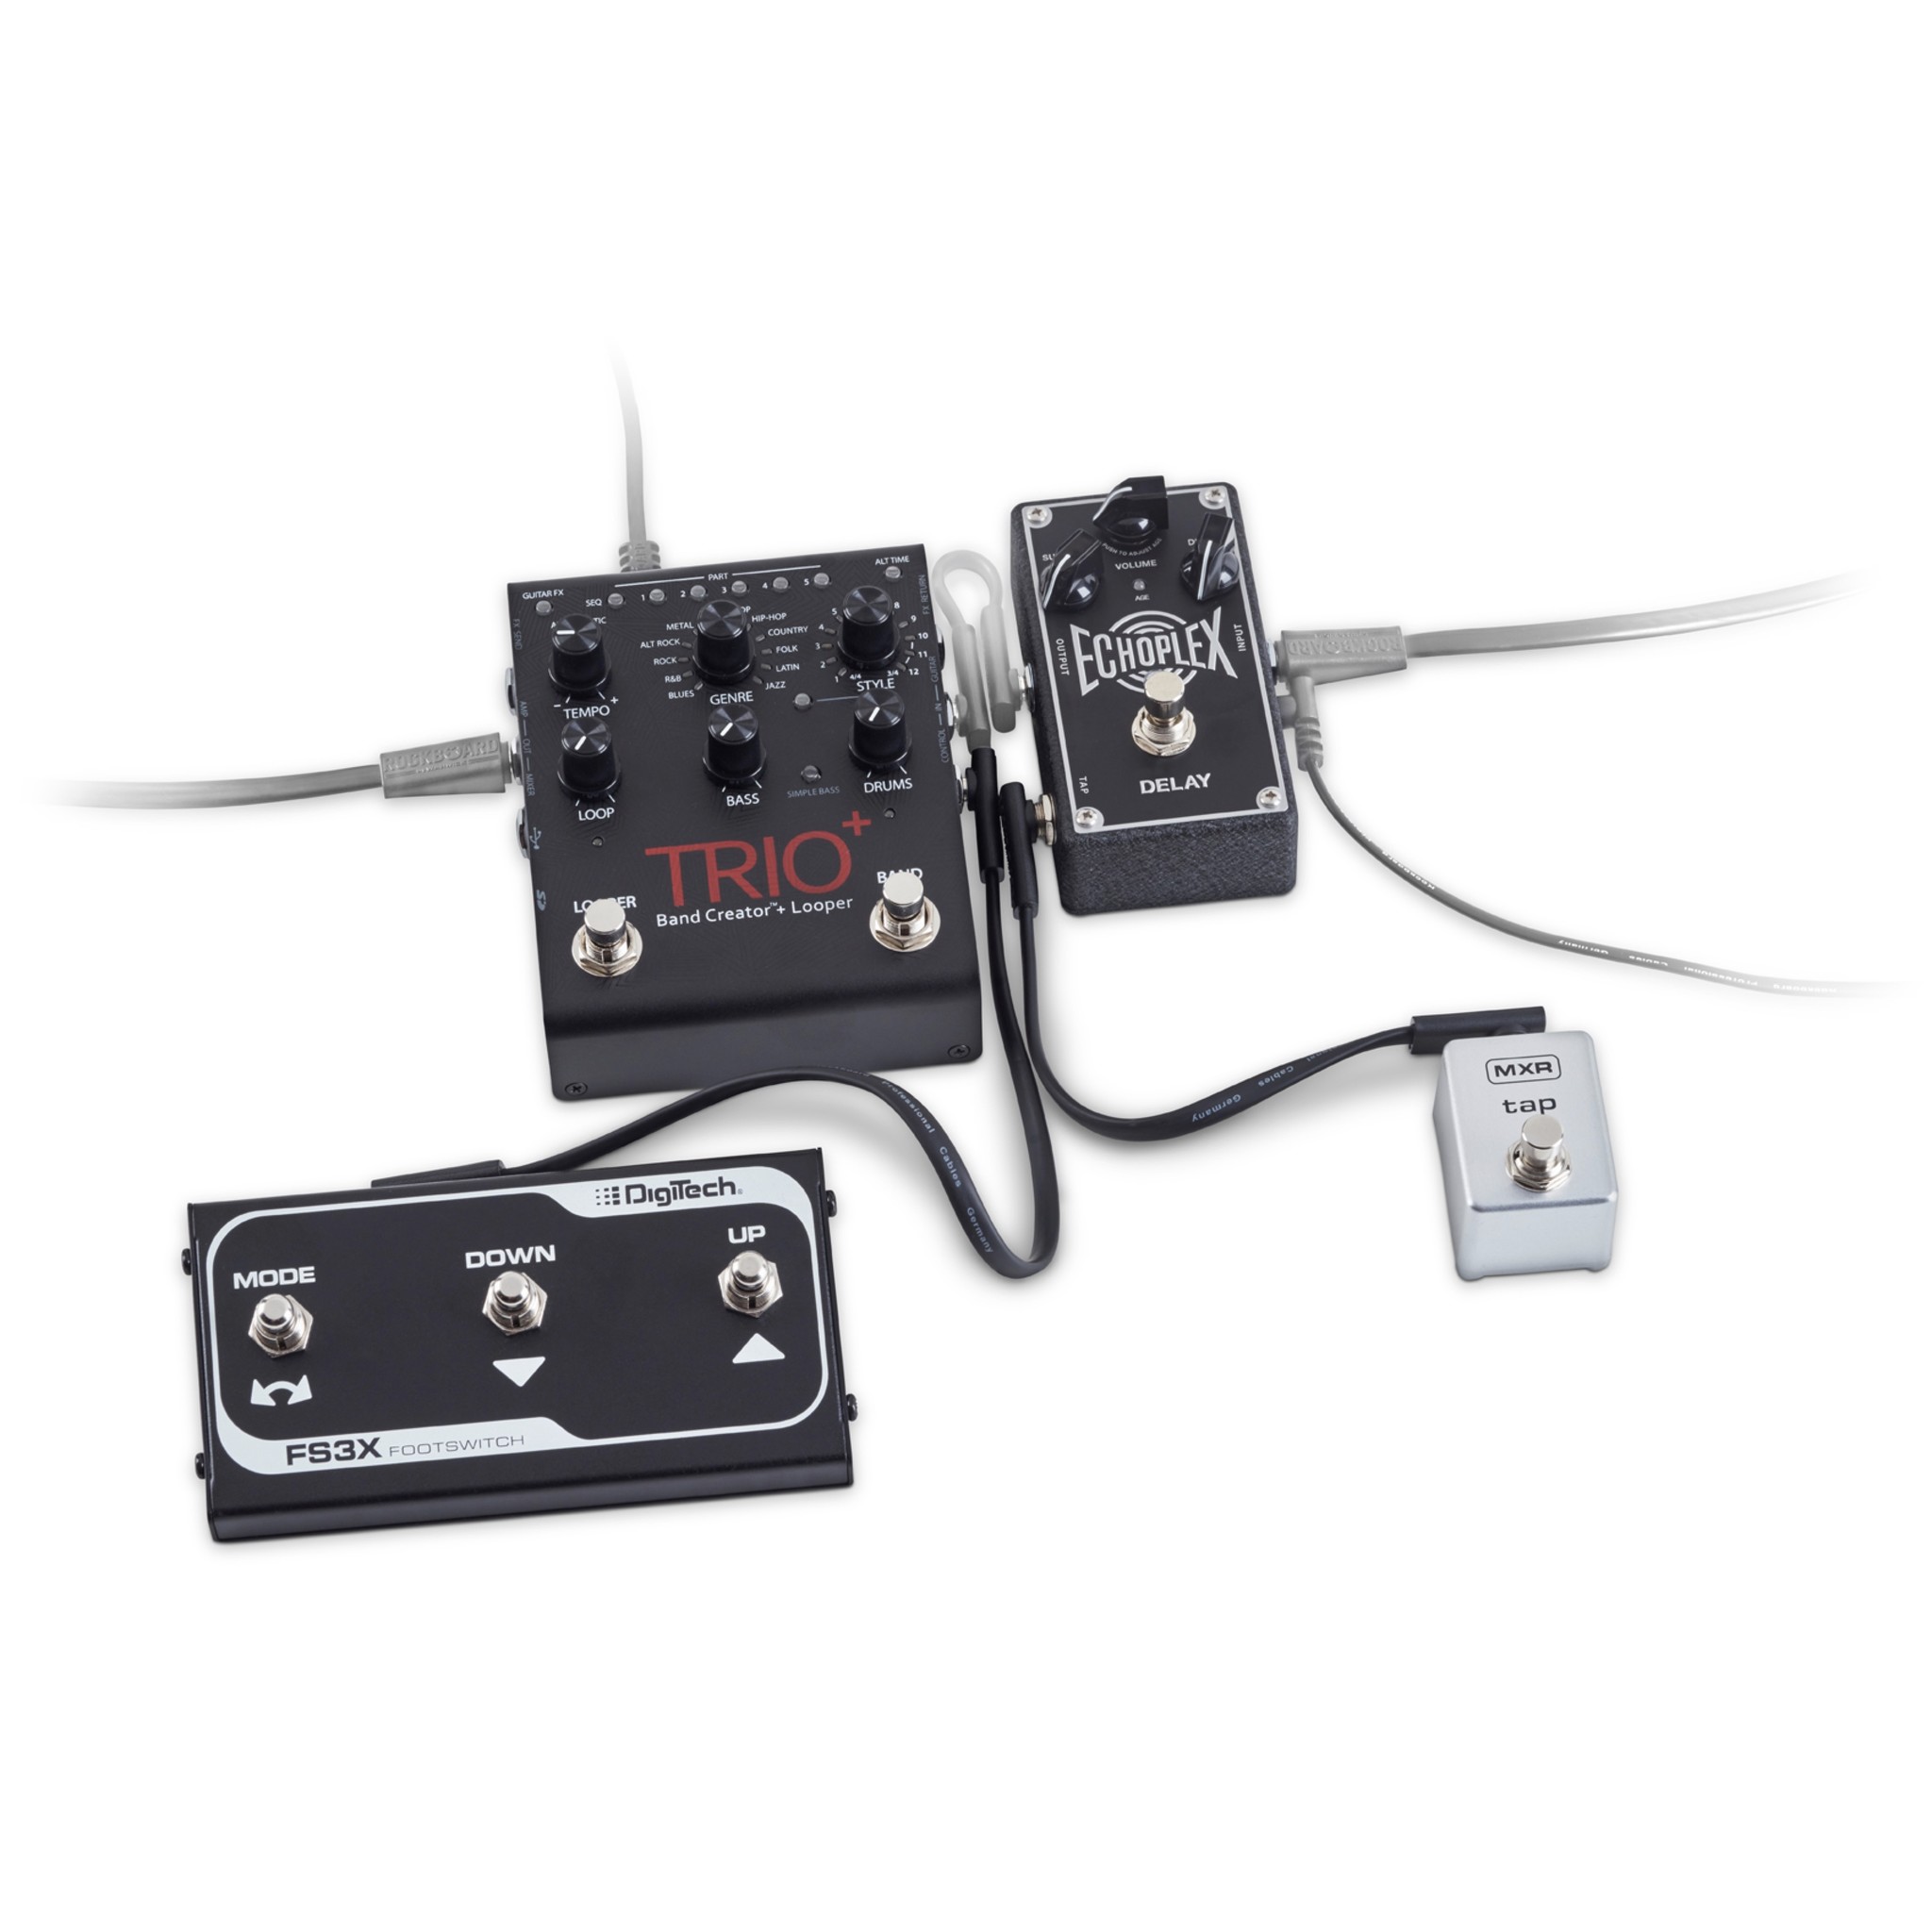 Rockboard Flat Patch TRS Cable, 30 cm / 11.81", Black, low profile, for switch & expression pedals